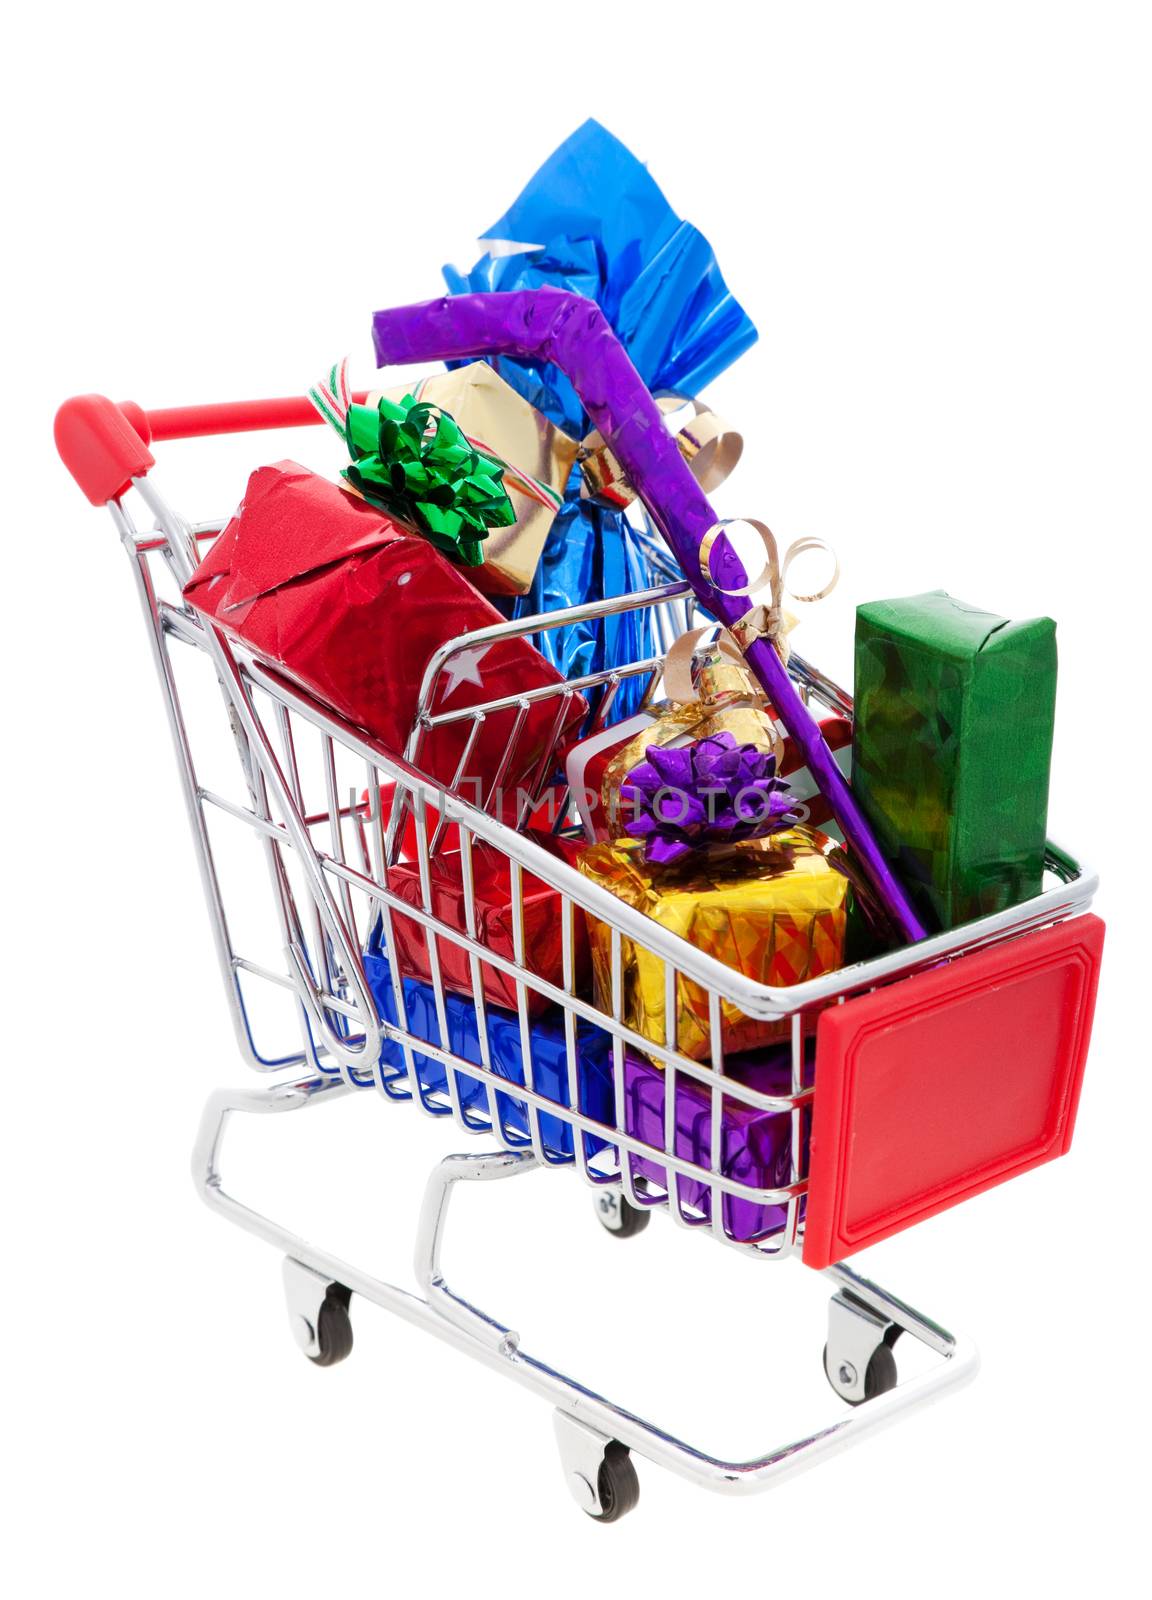 A cart full of wrapped Christmas presents, including a wrapped hockey stick and a wrapped bottle of wine.  Shot on white background.